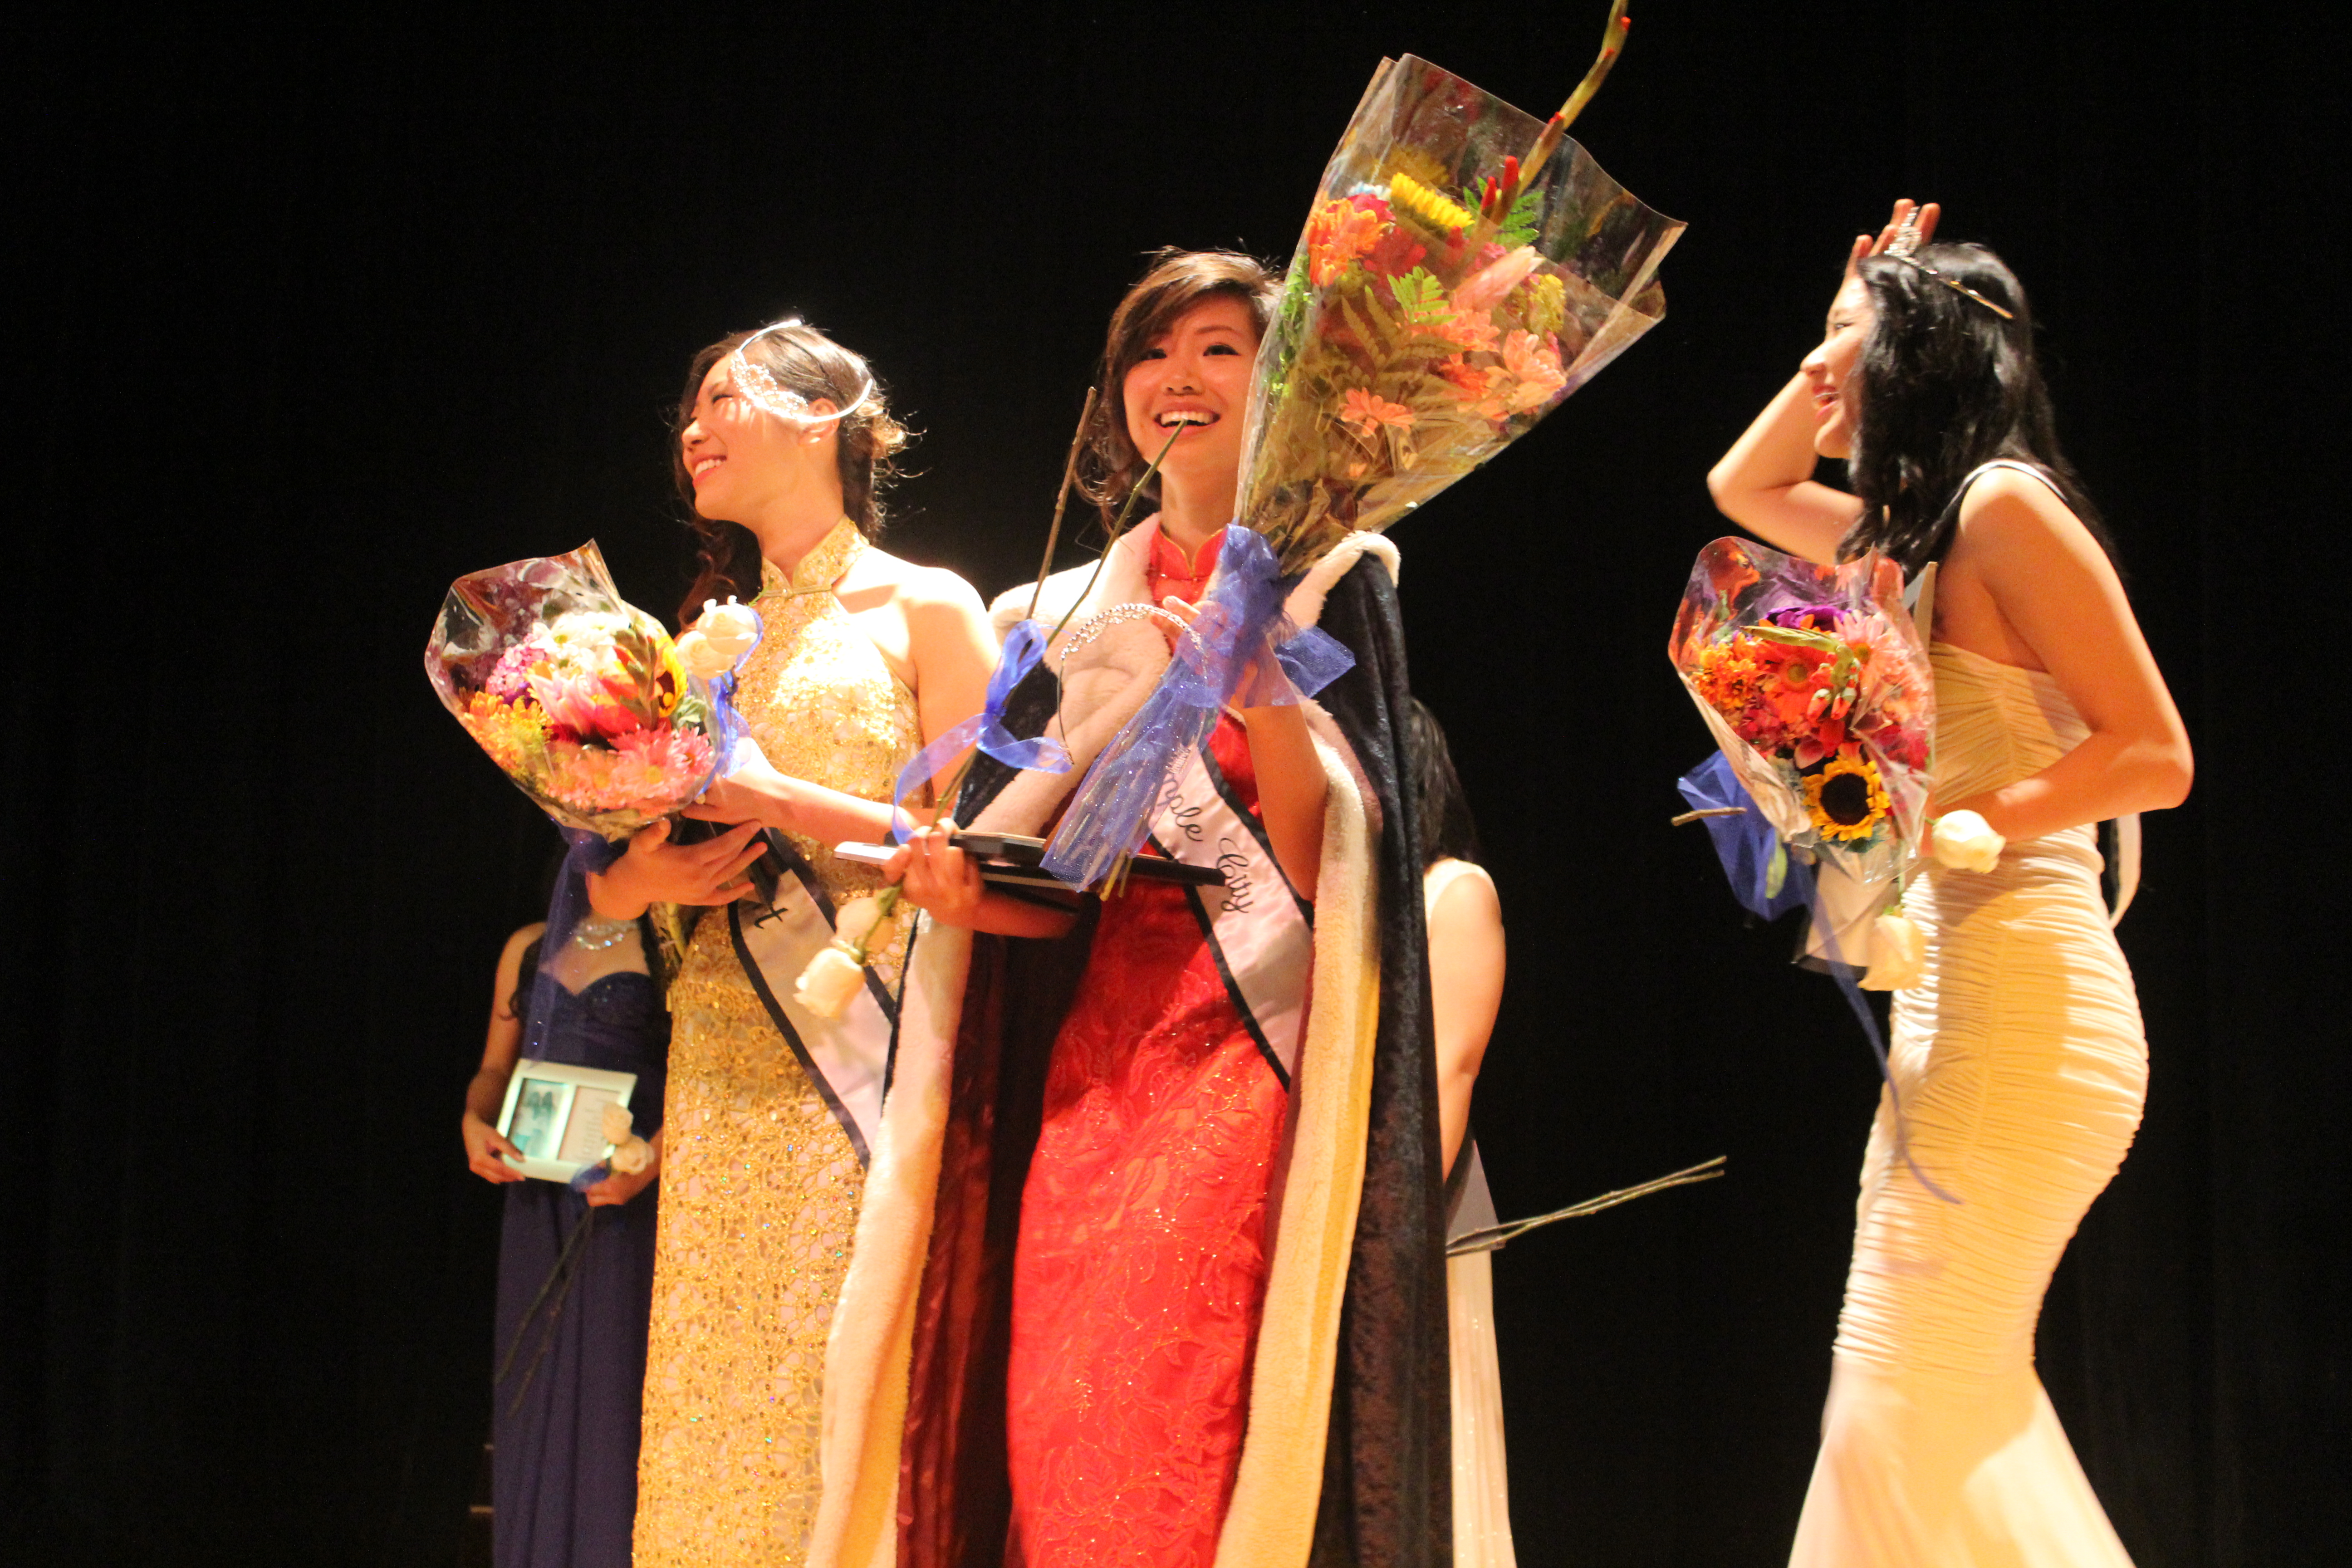 Cheng crowned Miss Temple City